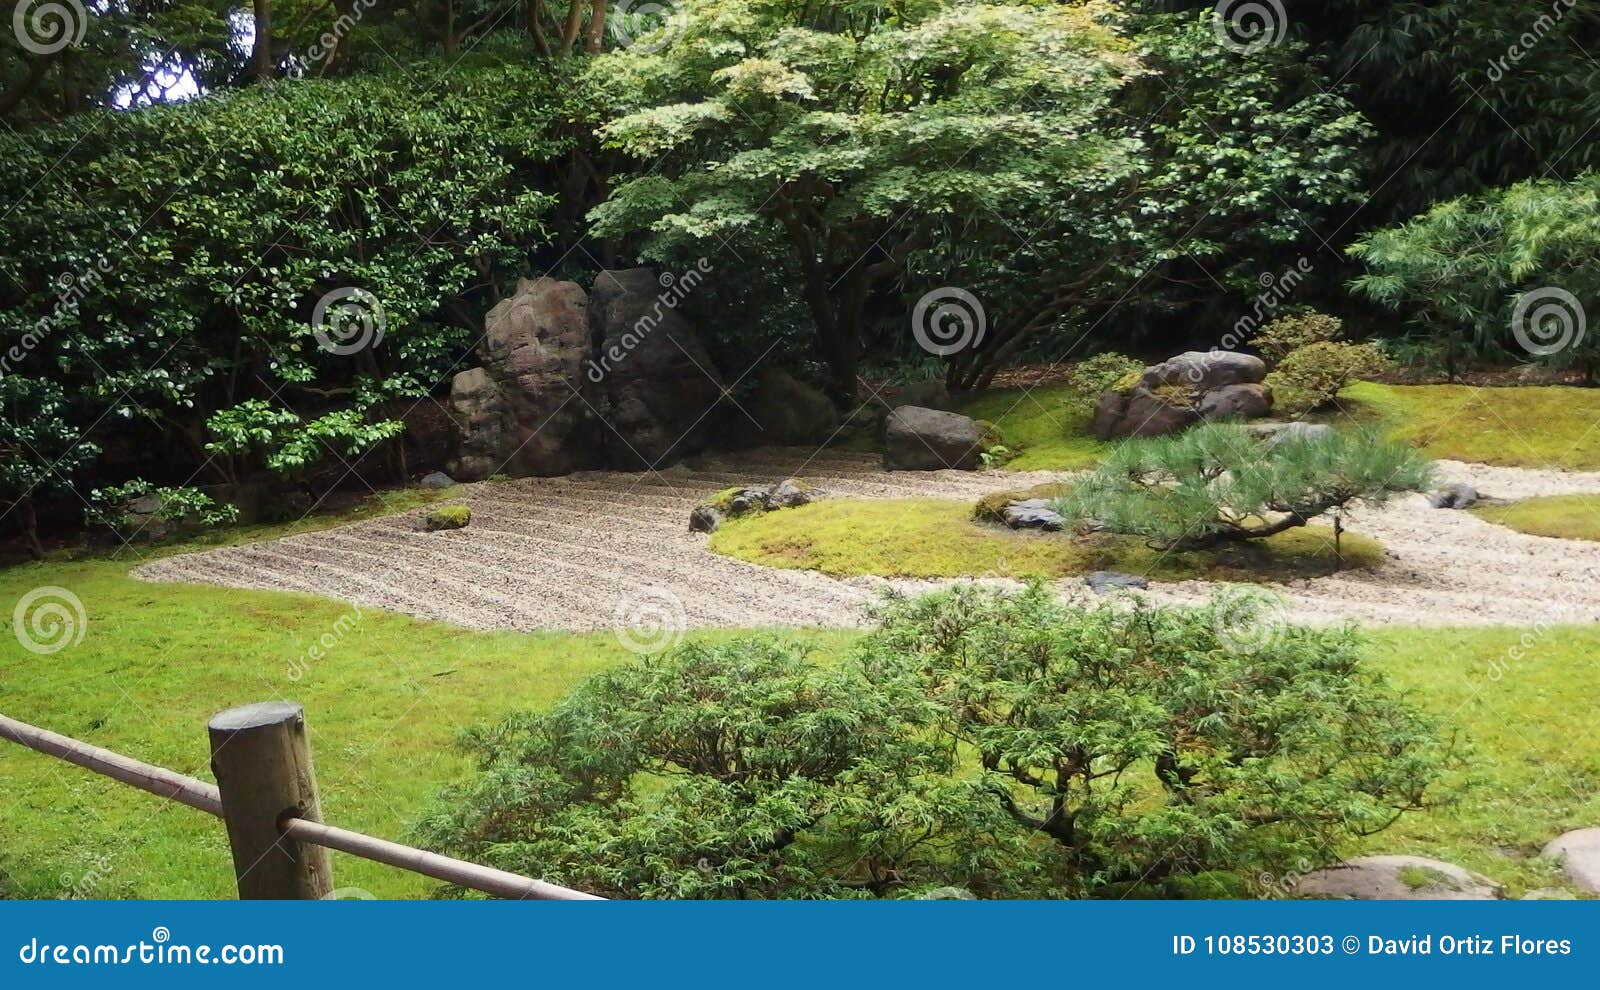 japanese zen garden with stones surrounded by grass